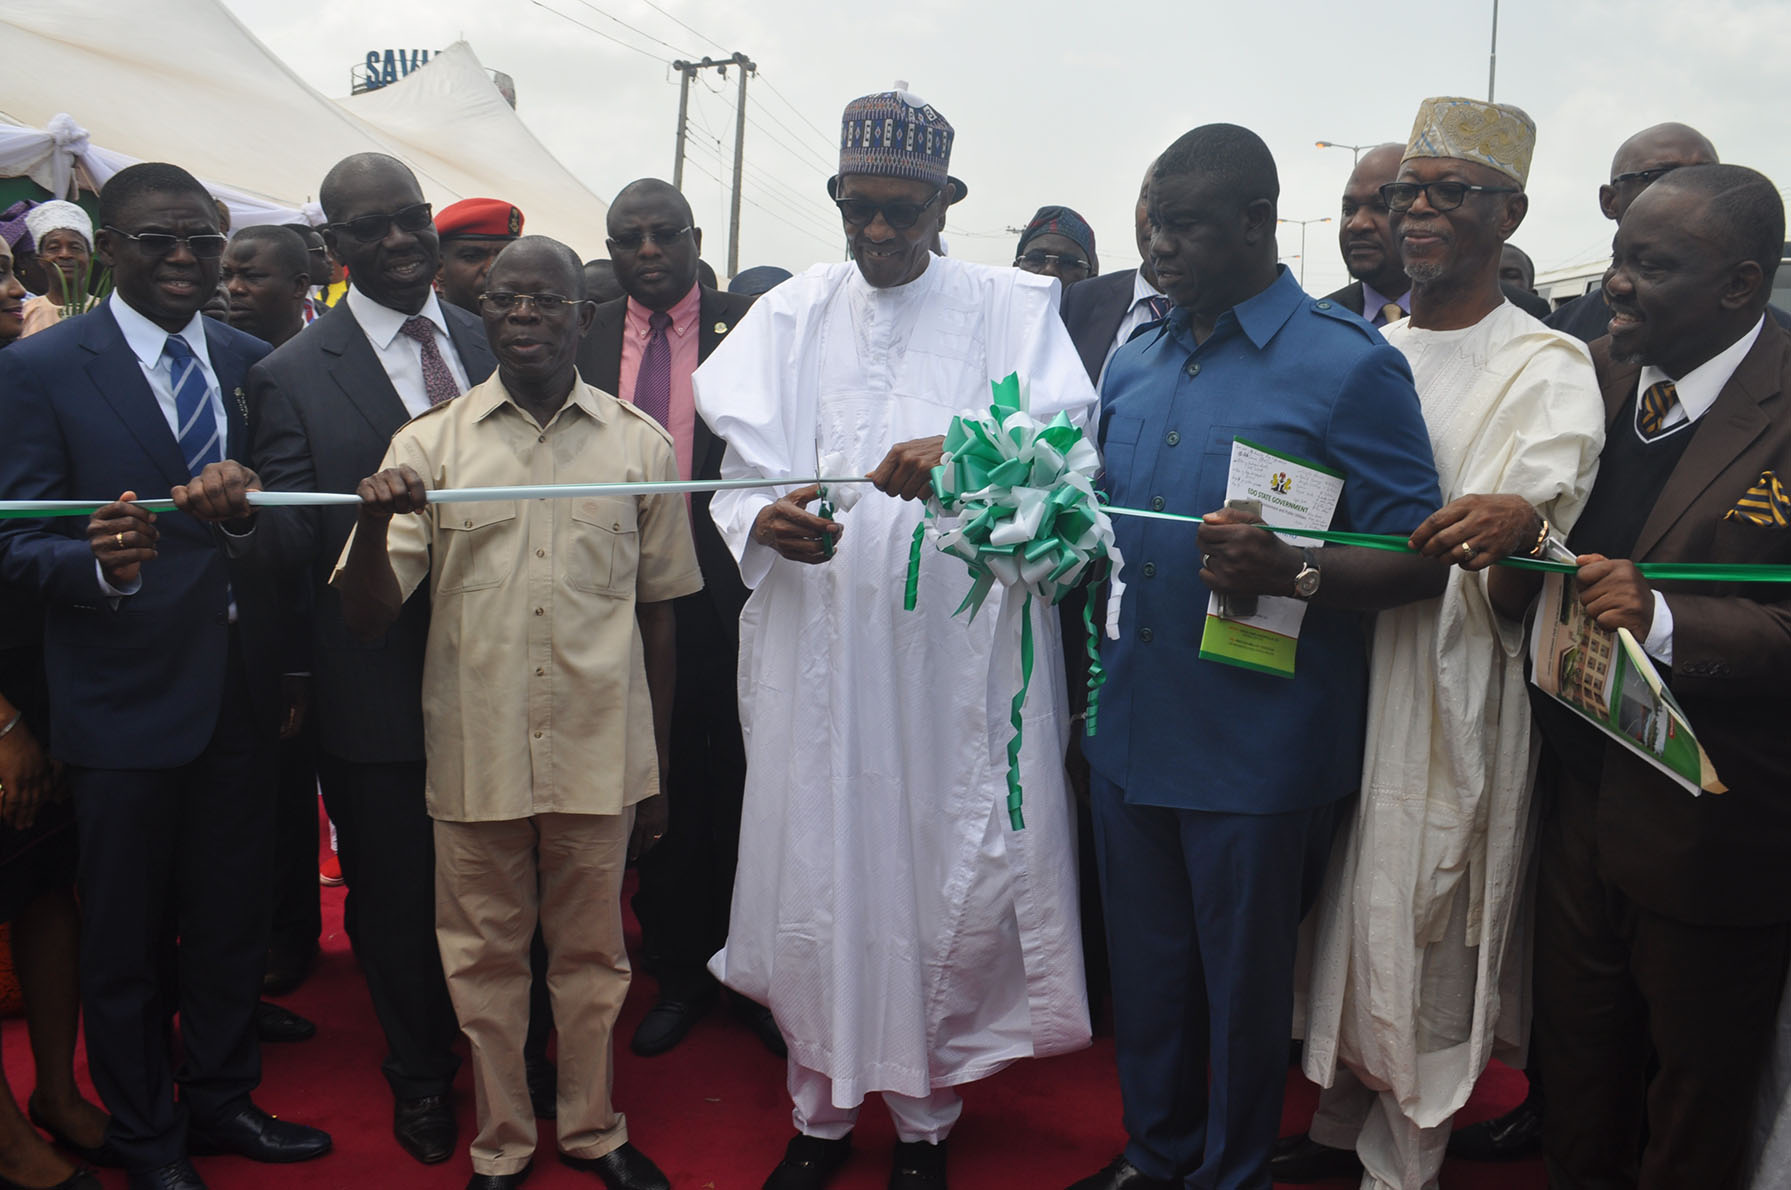 President Buhari at the commissioning of the 6-lane Siluko road, complete with street lights, walkways and underground drainage in the state capital.